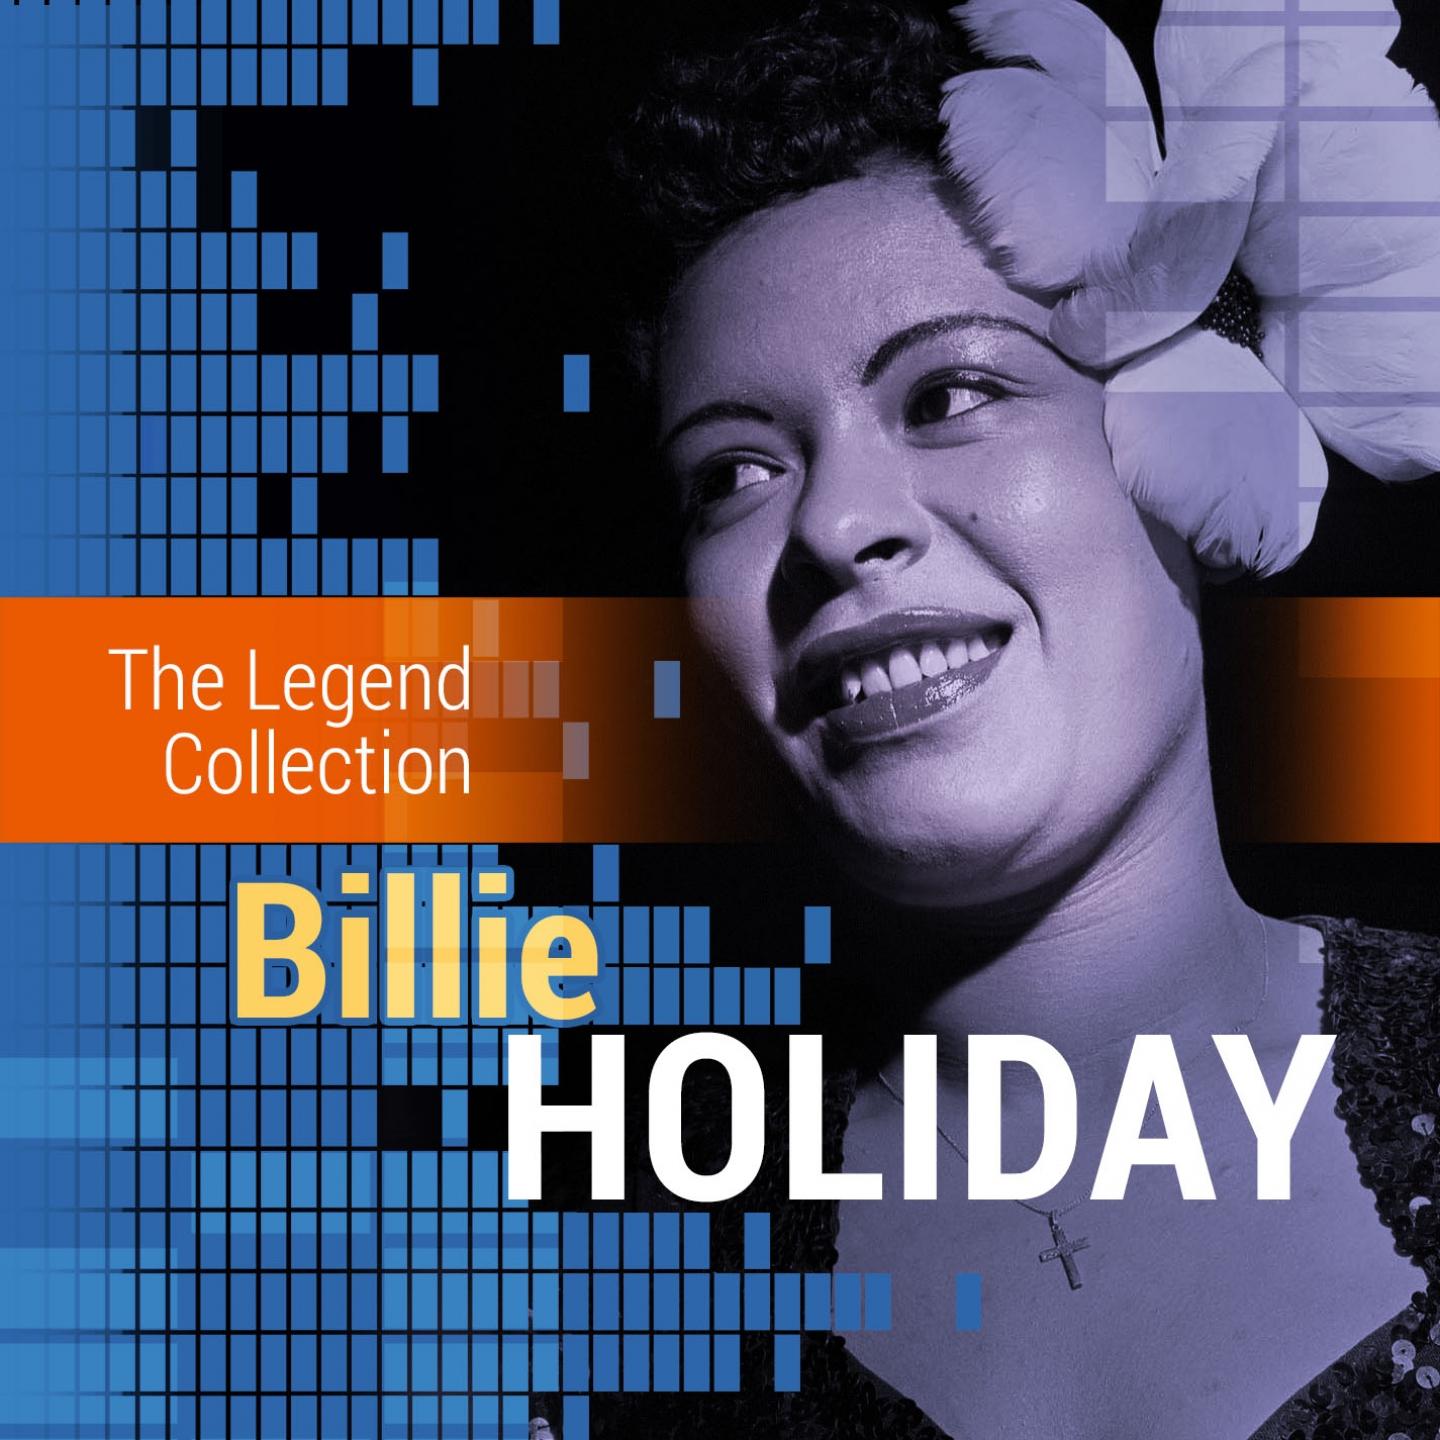 The Legend Collection: Billie Holiday